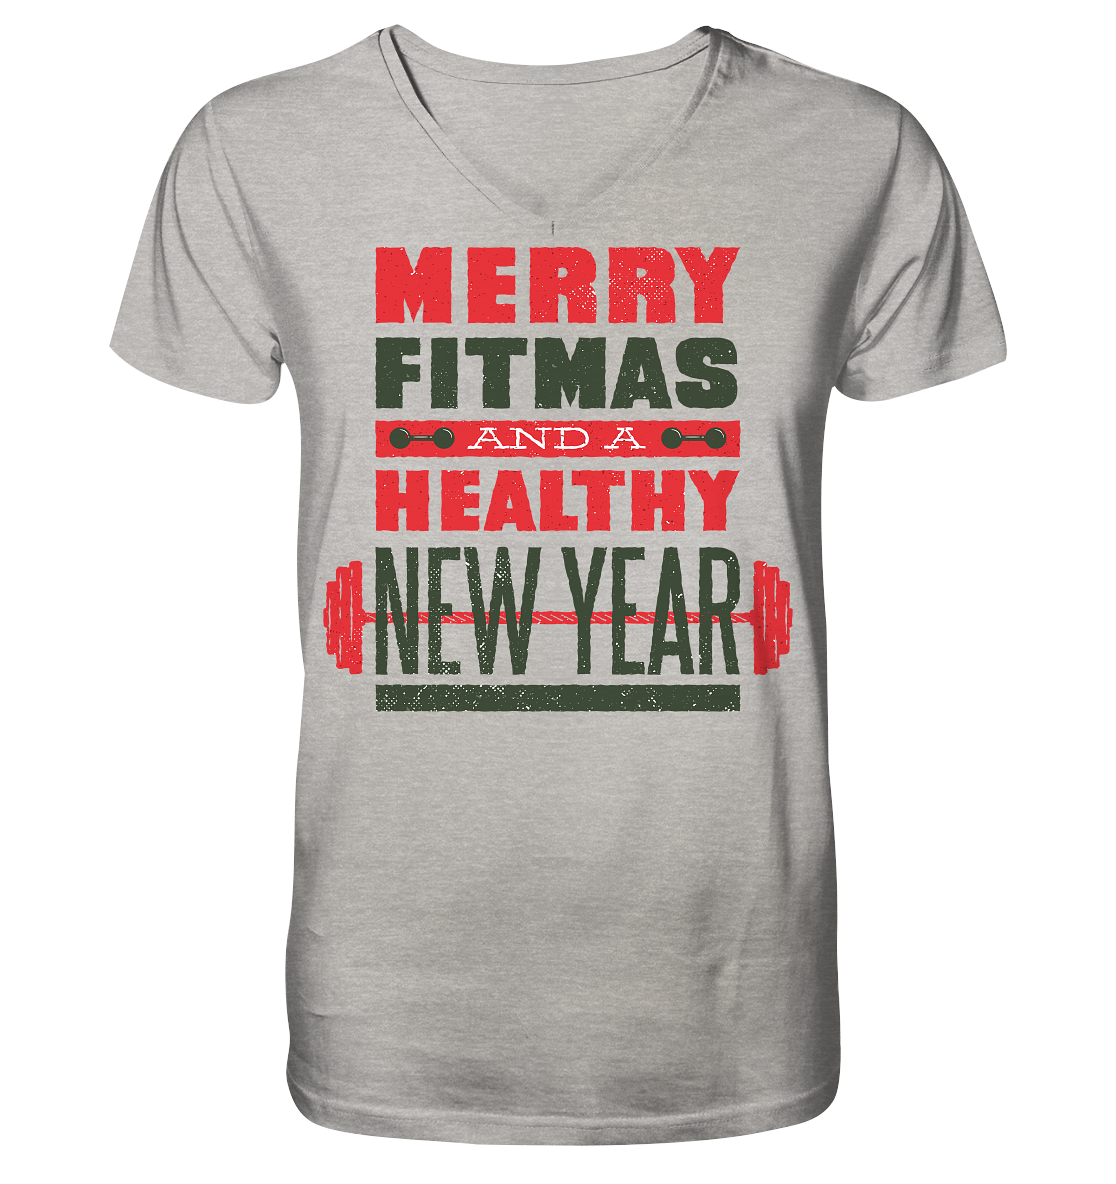 Weihnachtliches Design, Gym, Merry Fitmas and a Healthy New Year - Mens Organic V-Neck Shirt